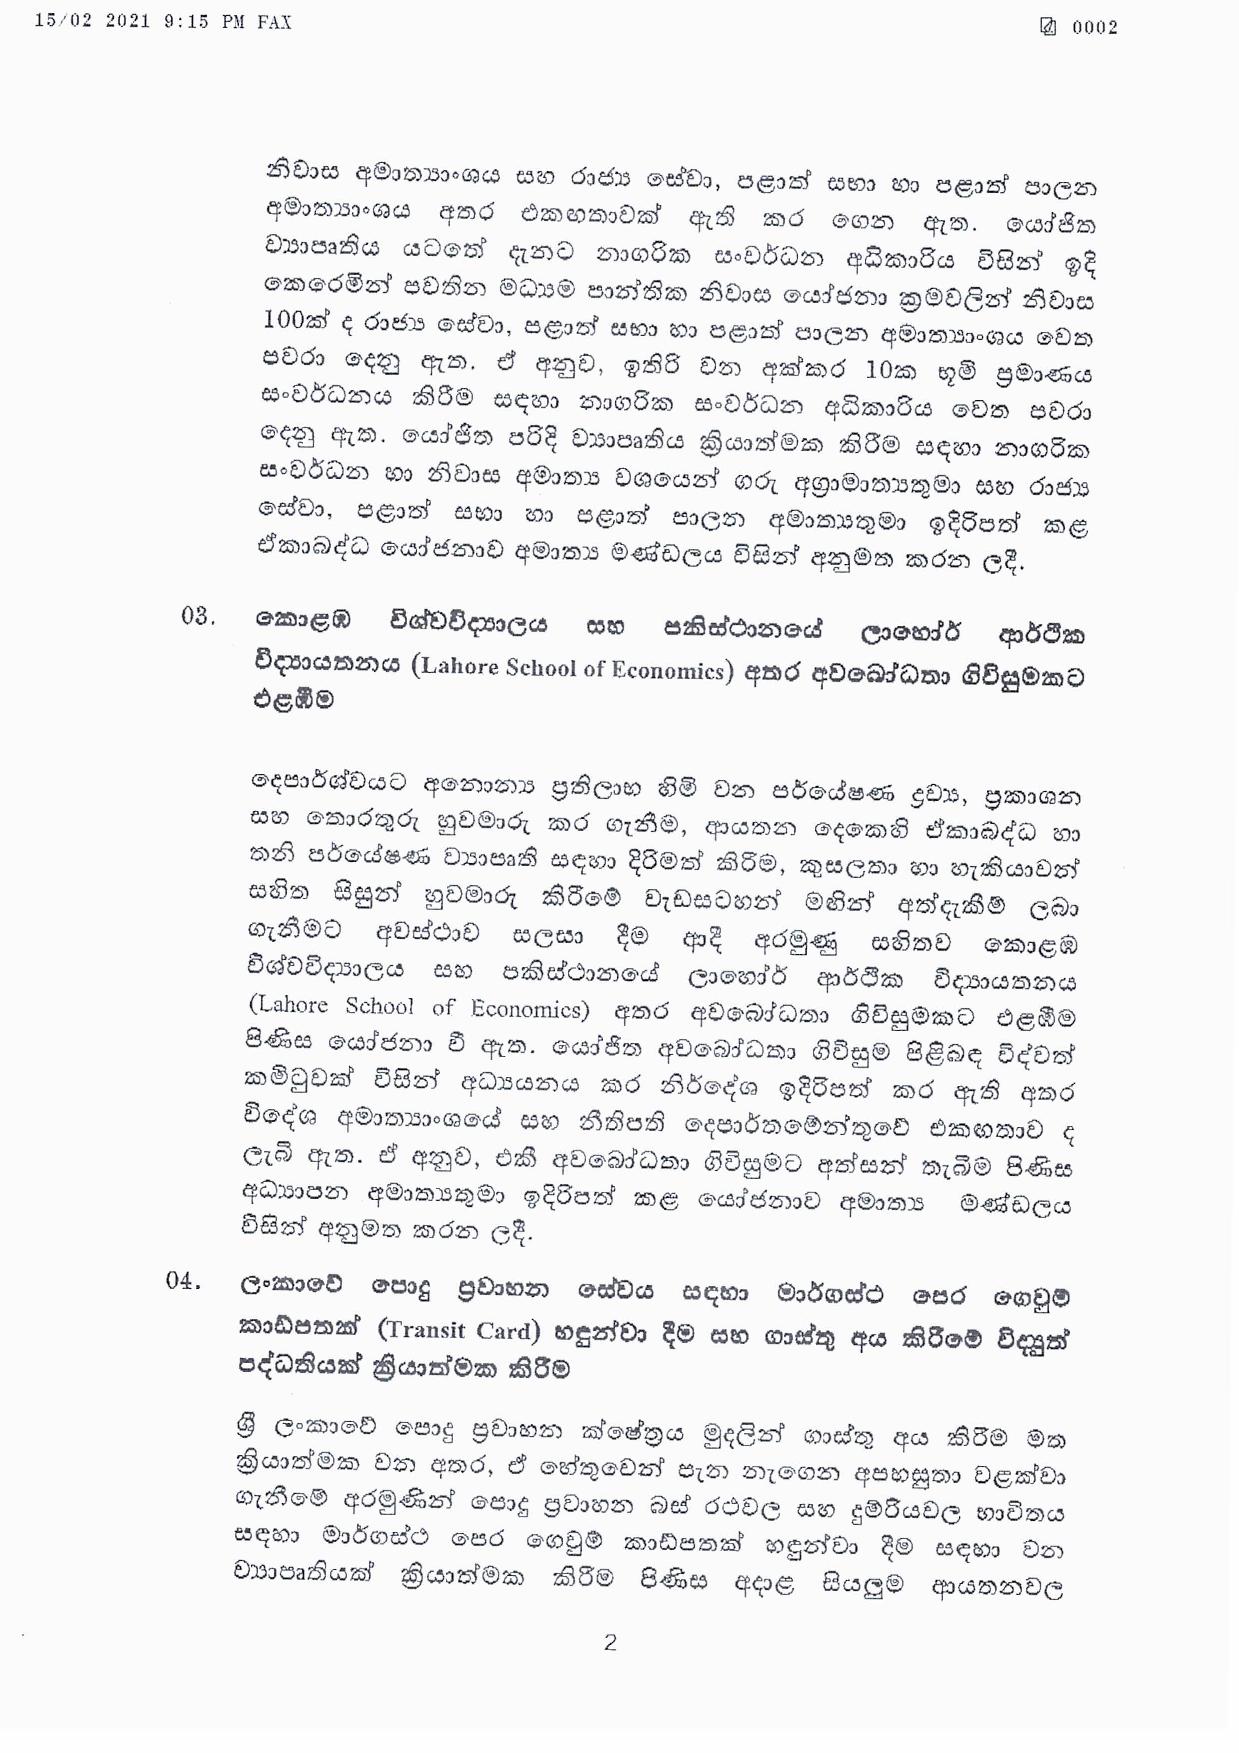 Cabinet Decision on 15.02.2021 page 002